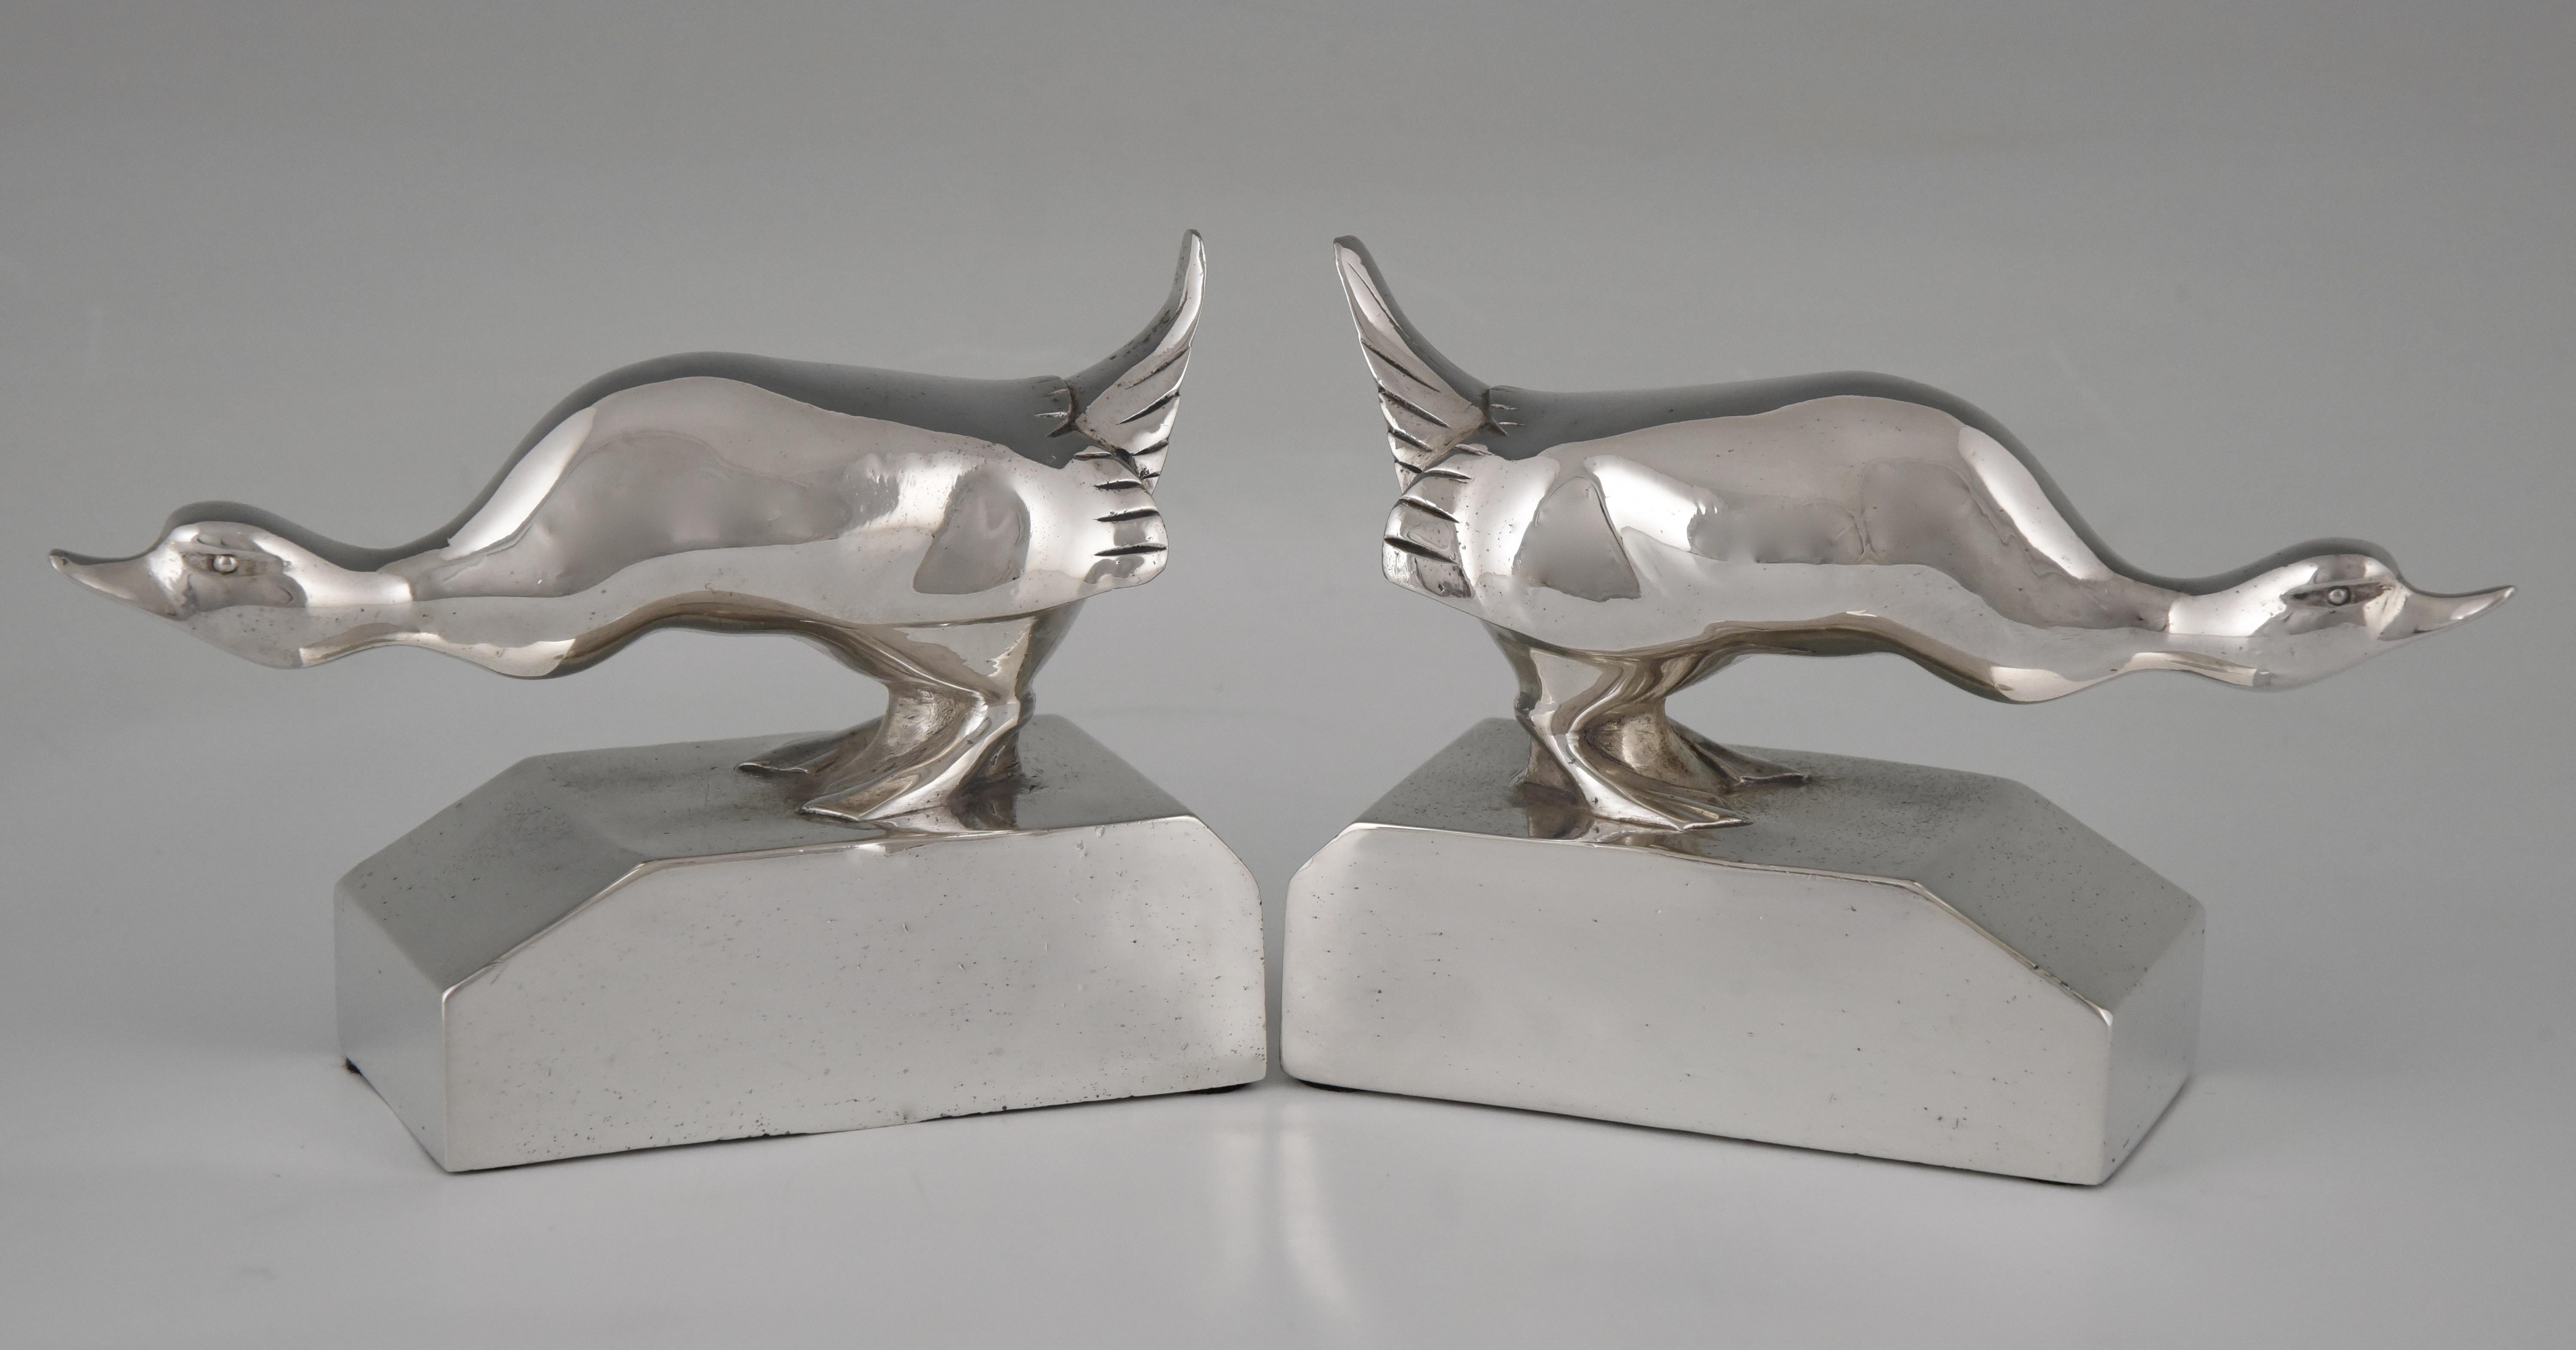 Pair of Art Deco silvered bronze bookends by the famous French artist G.H. Laurent. Signed and with the foundry mark of Les Neveux de Lehmann. Numbered, circa 1925. France.
This pair is illustrated in the book: ?“Art Deco and other figures” by